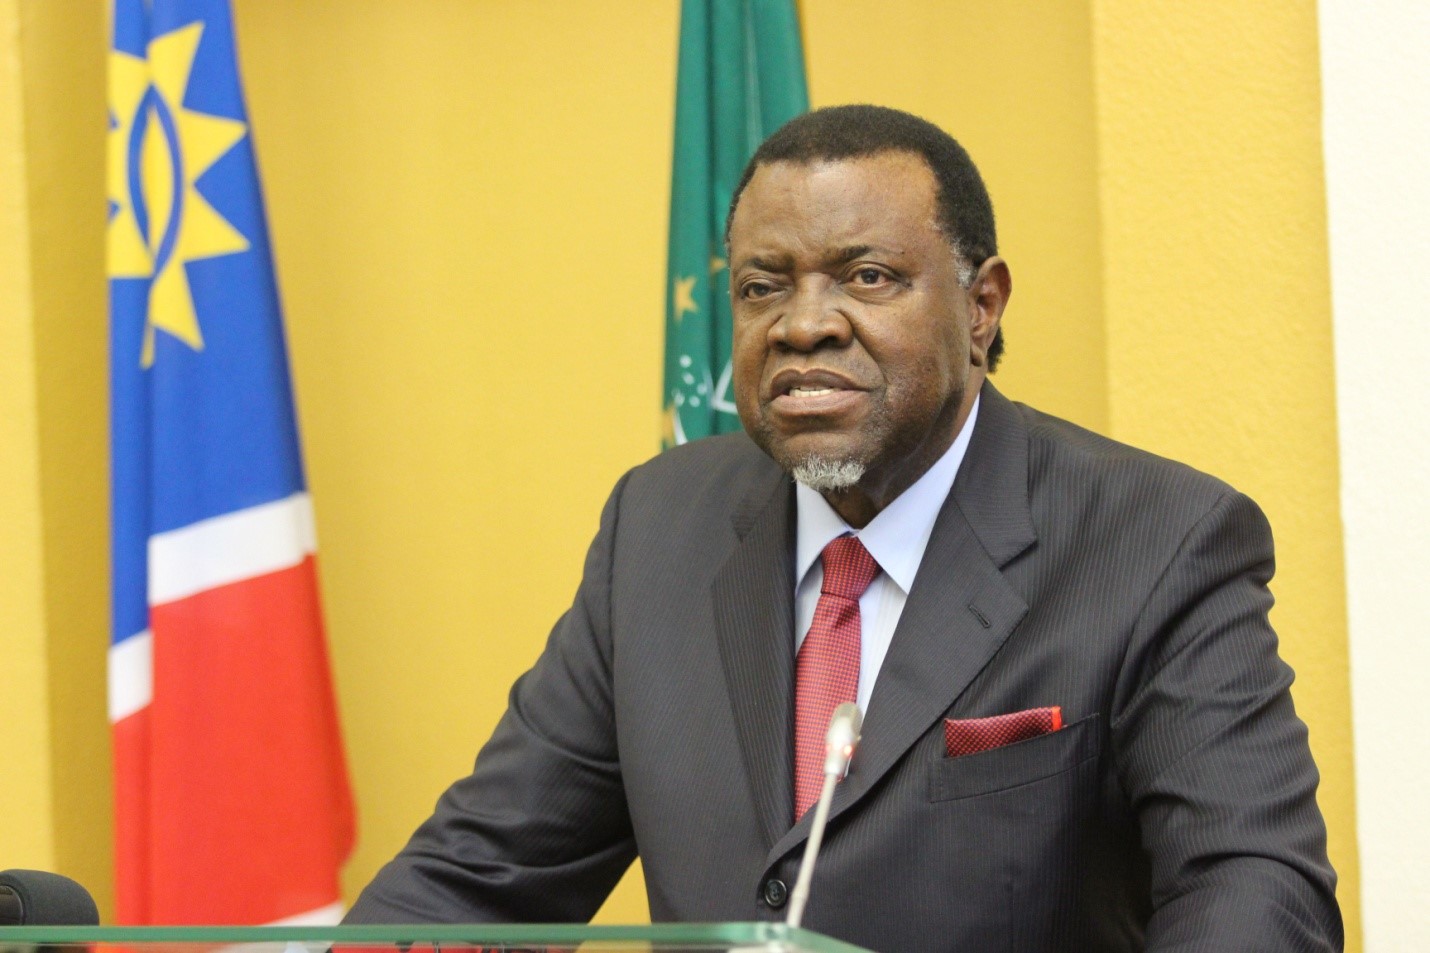 Several figures close to Namibian President Hage Geingob were filmed discussing the laundering of political contributions